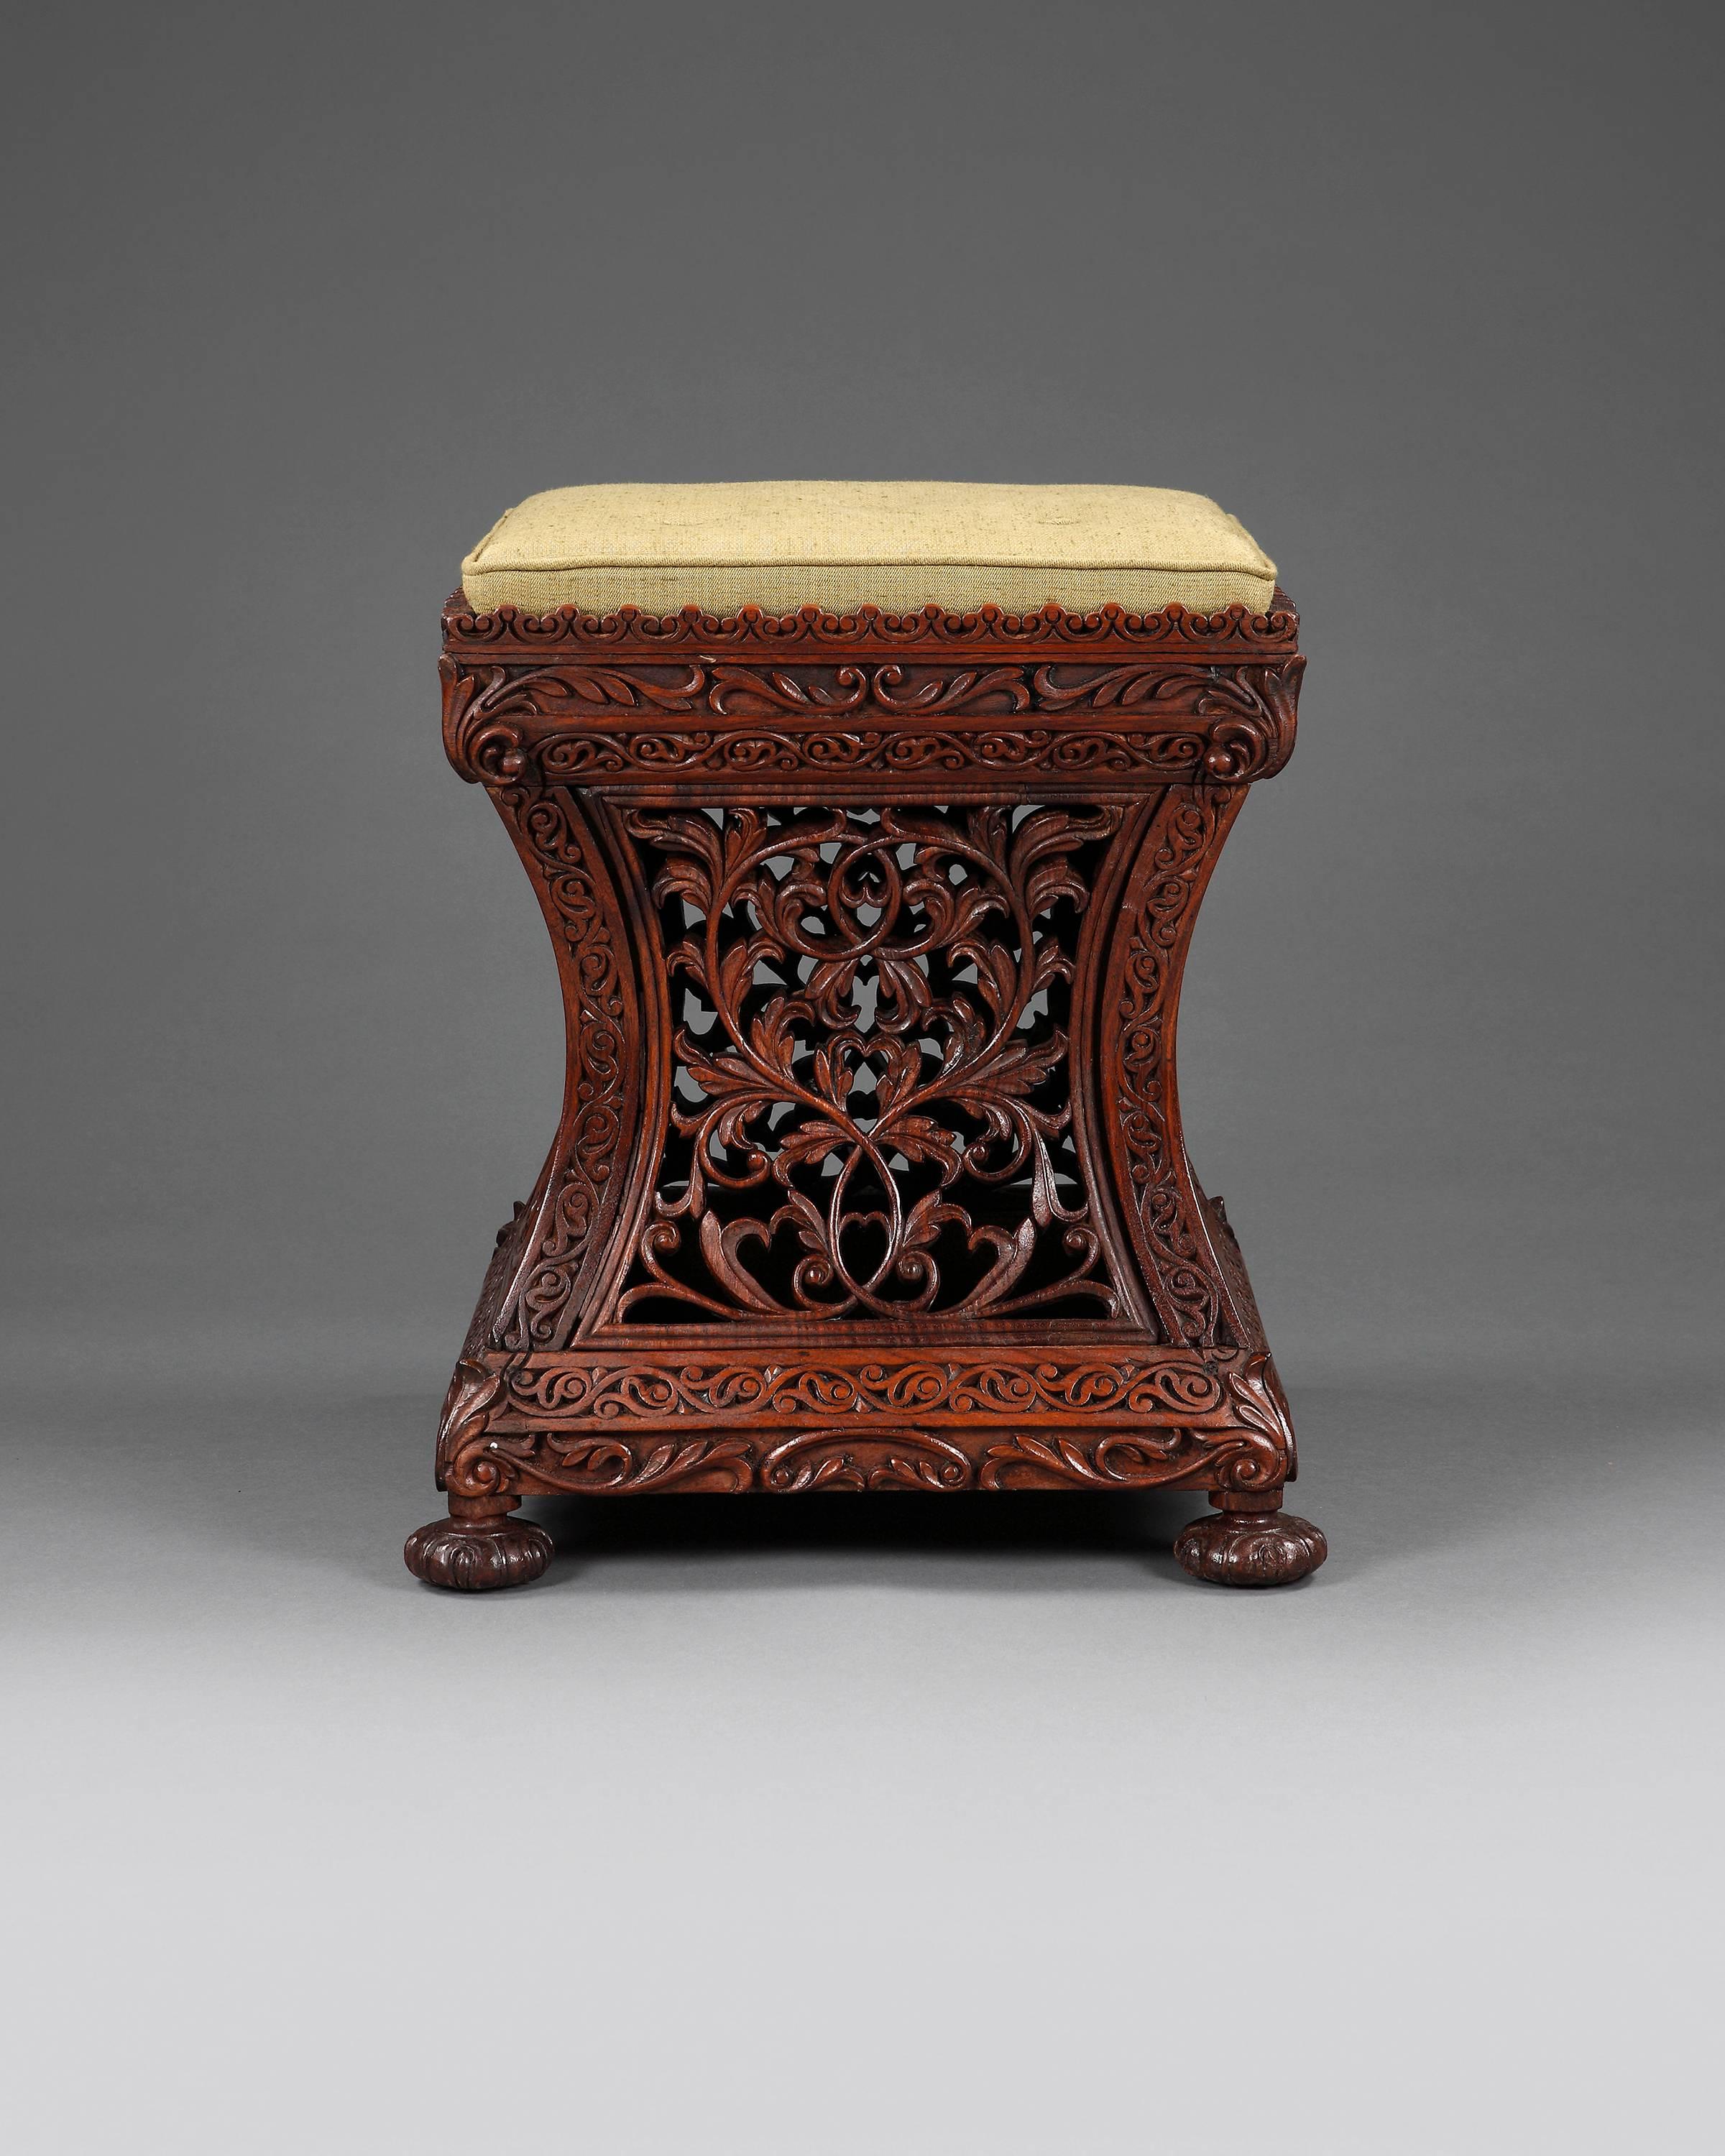 A finely carved and stylish blackwood stool with upholstered drop in seat. Having concave sides and supported on small carved squat feet.
The common name for this blackwood is rosewood.